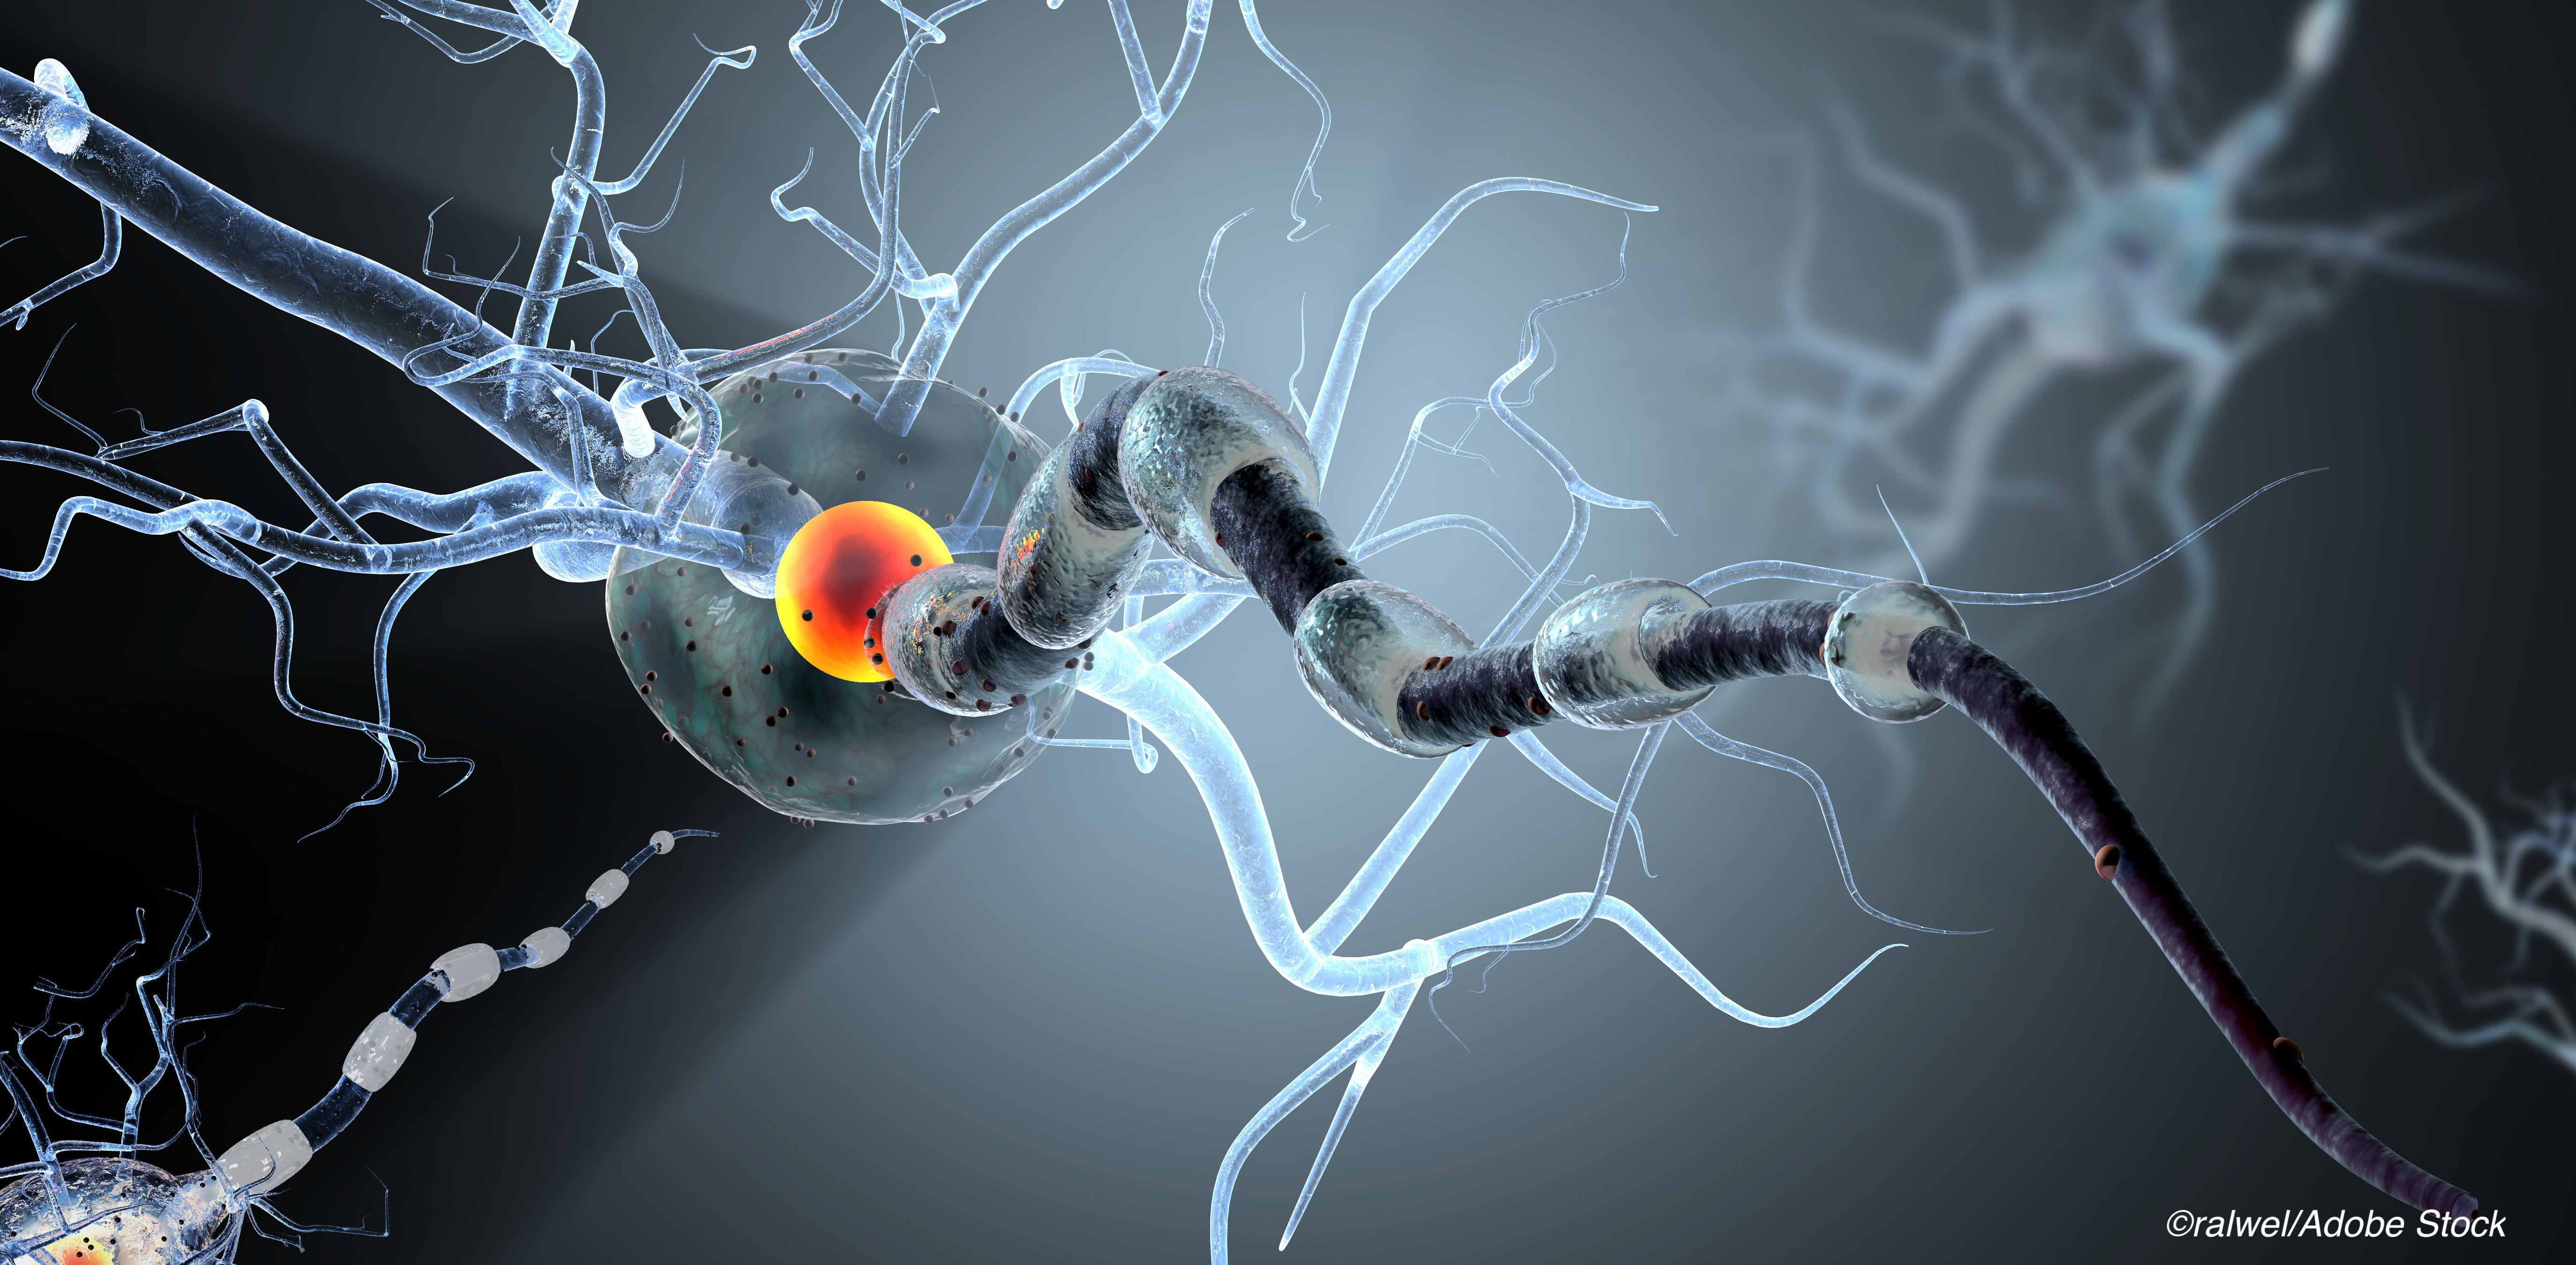 Siponimod May Have Cognitive Benefit in Secondary Progressive MS